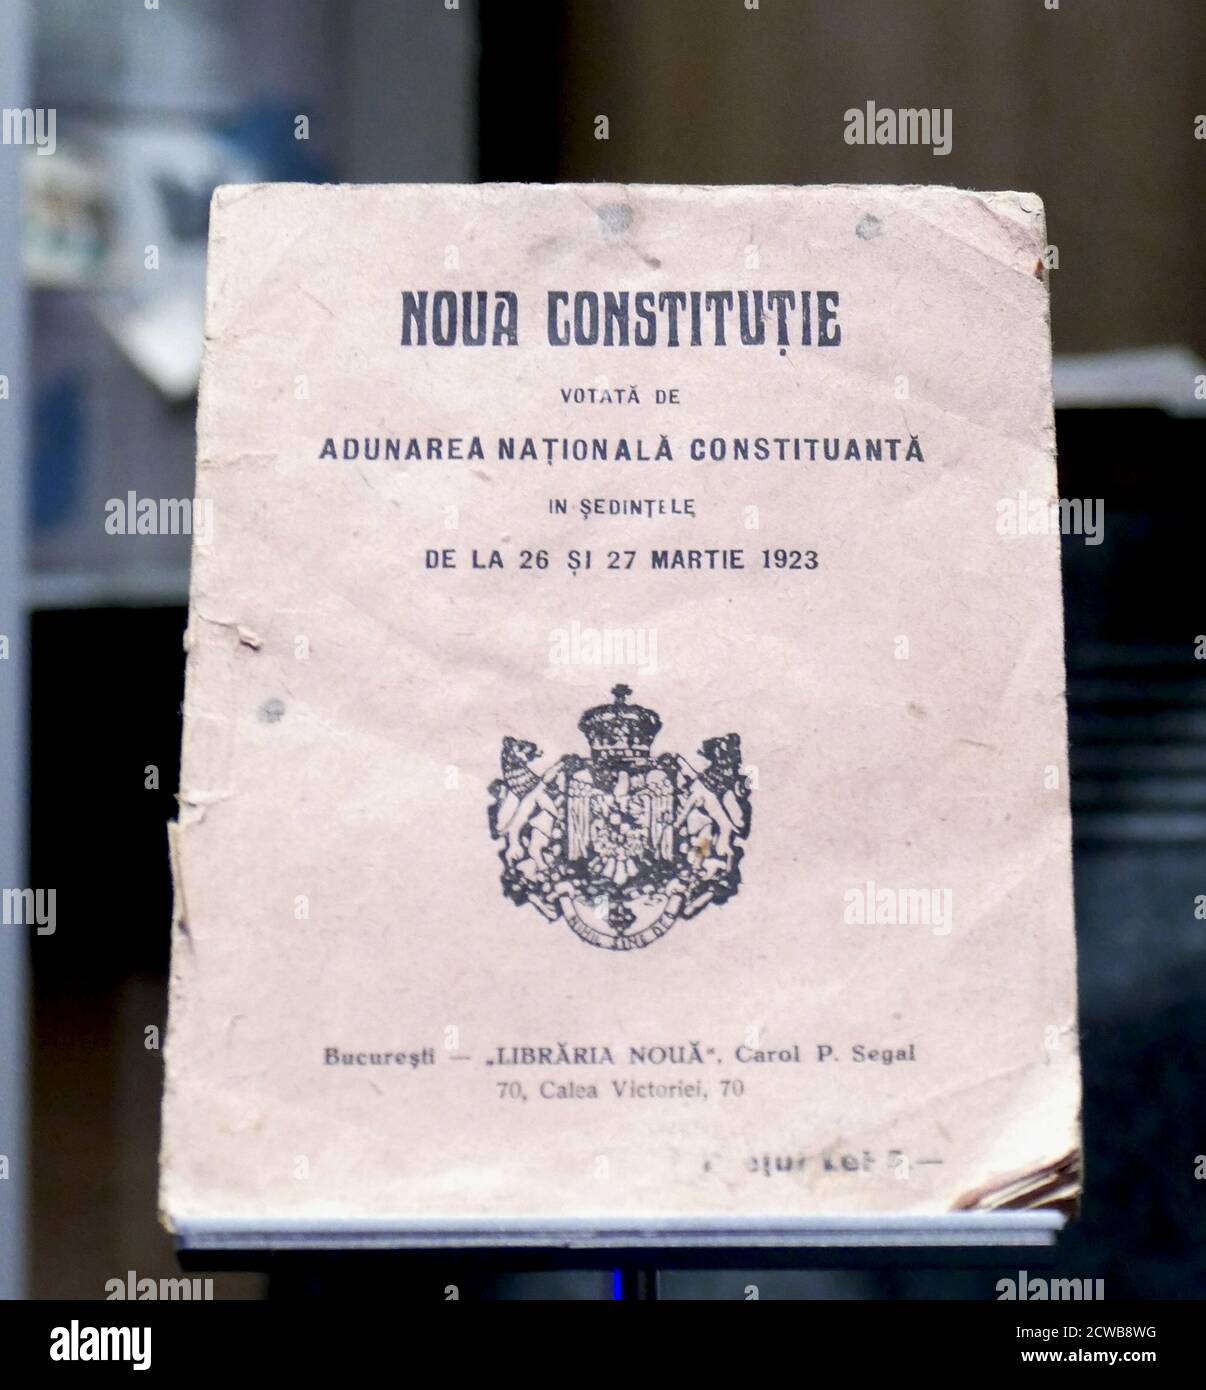 The 1923 Constitution of Romania, also called the Constitution of Union, was intended to align the organisation of the state on the basis of universal male suffrage and the new realities that arose after the Great Union of 1918. Stock Photo